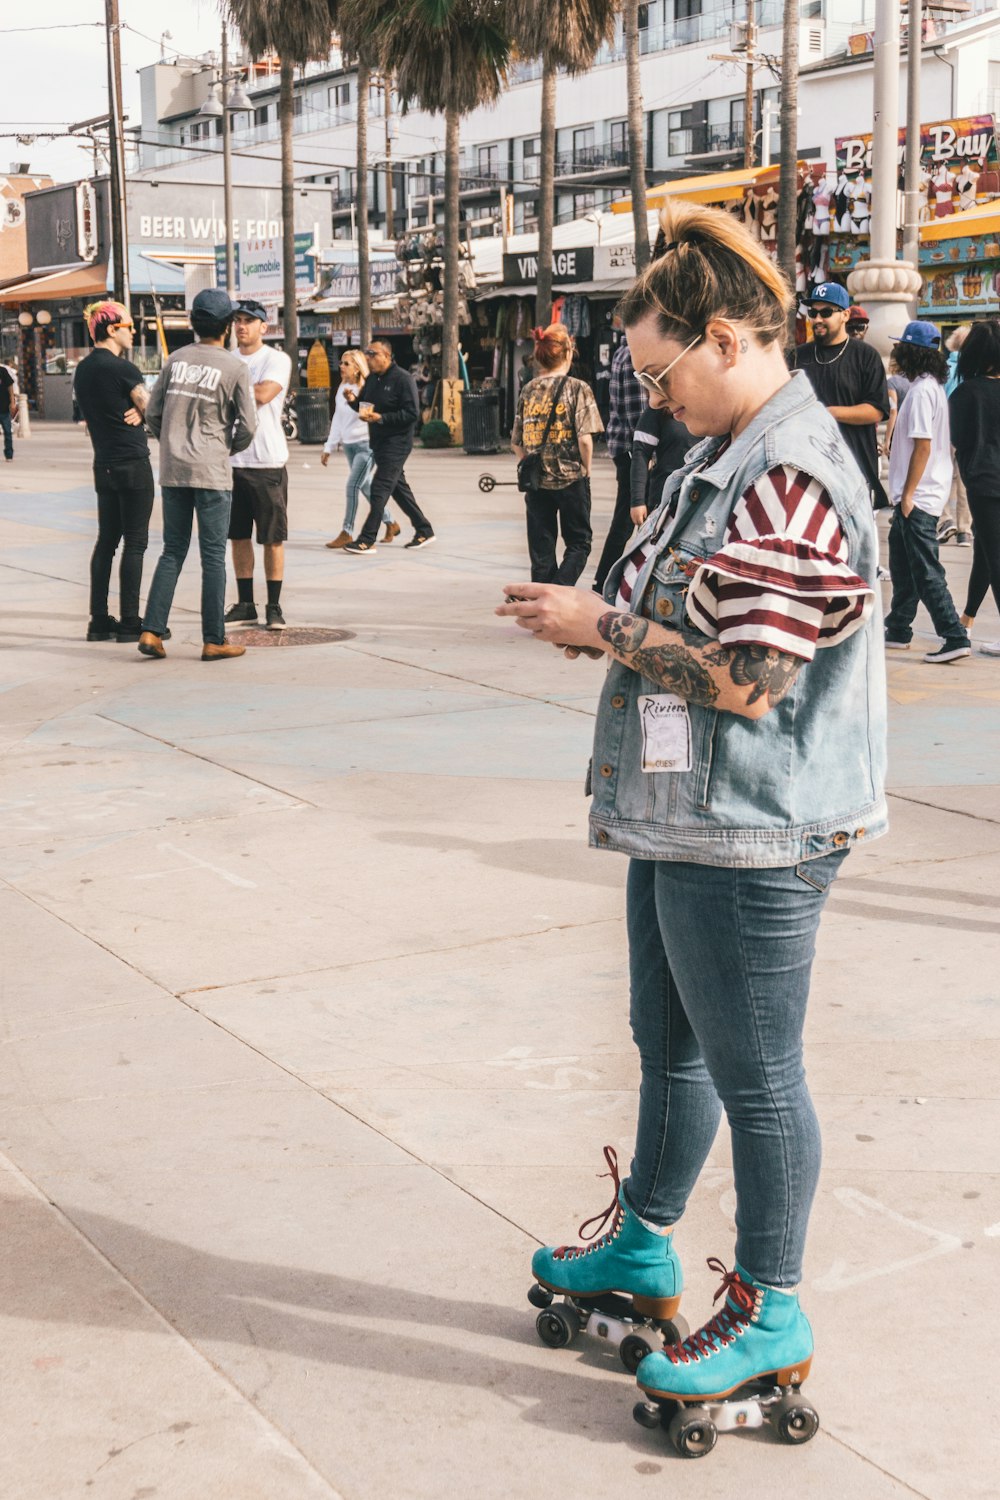 woman in roller skates using smartphone near people